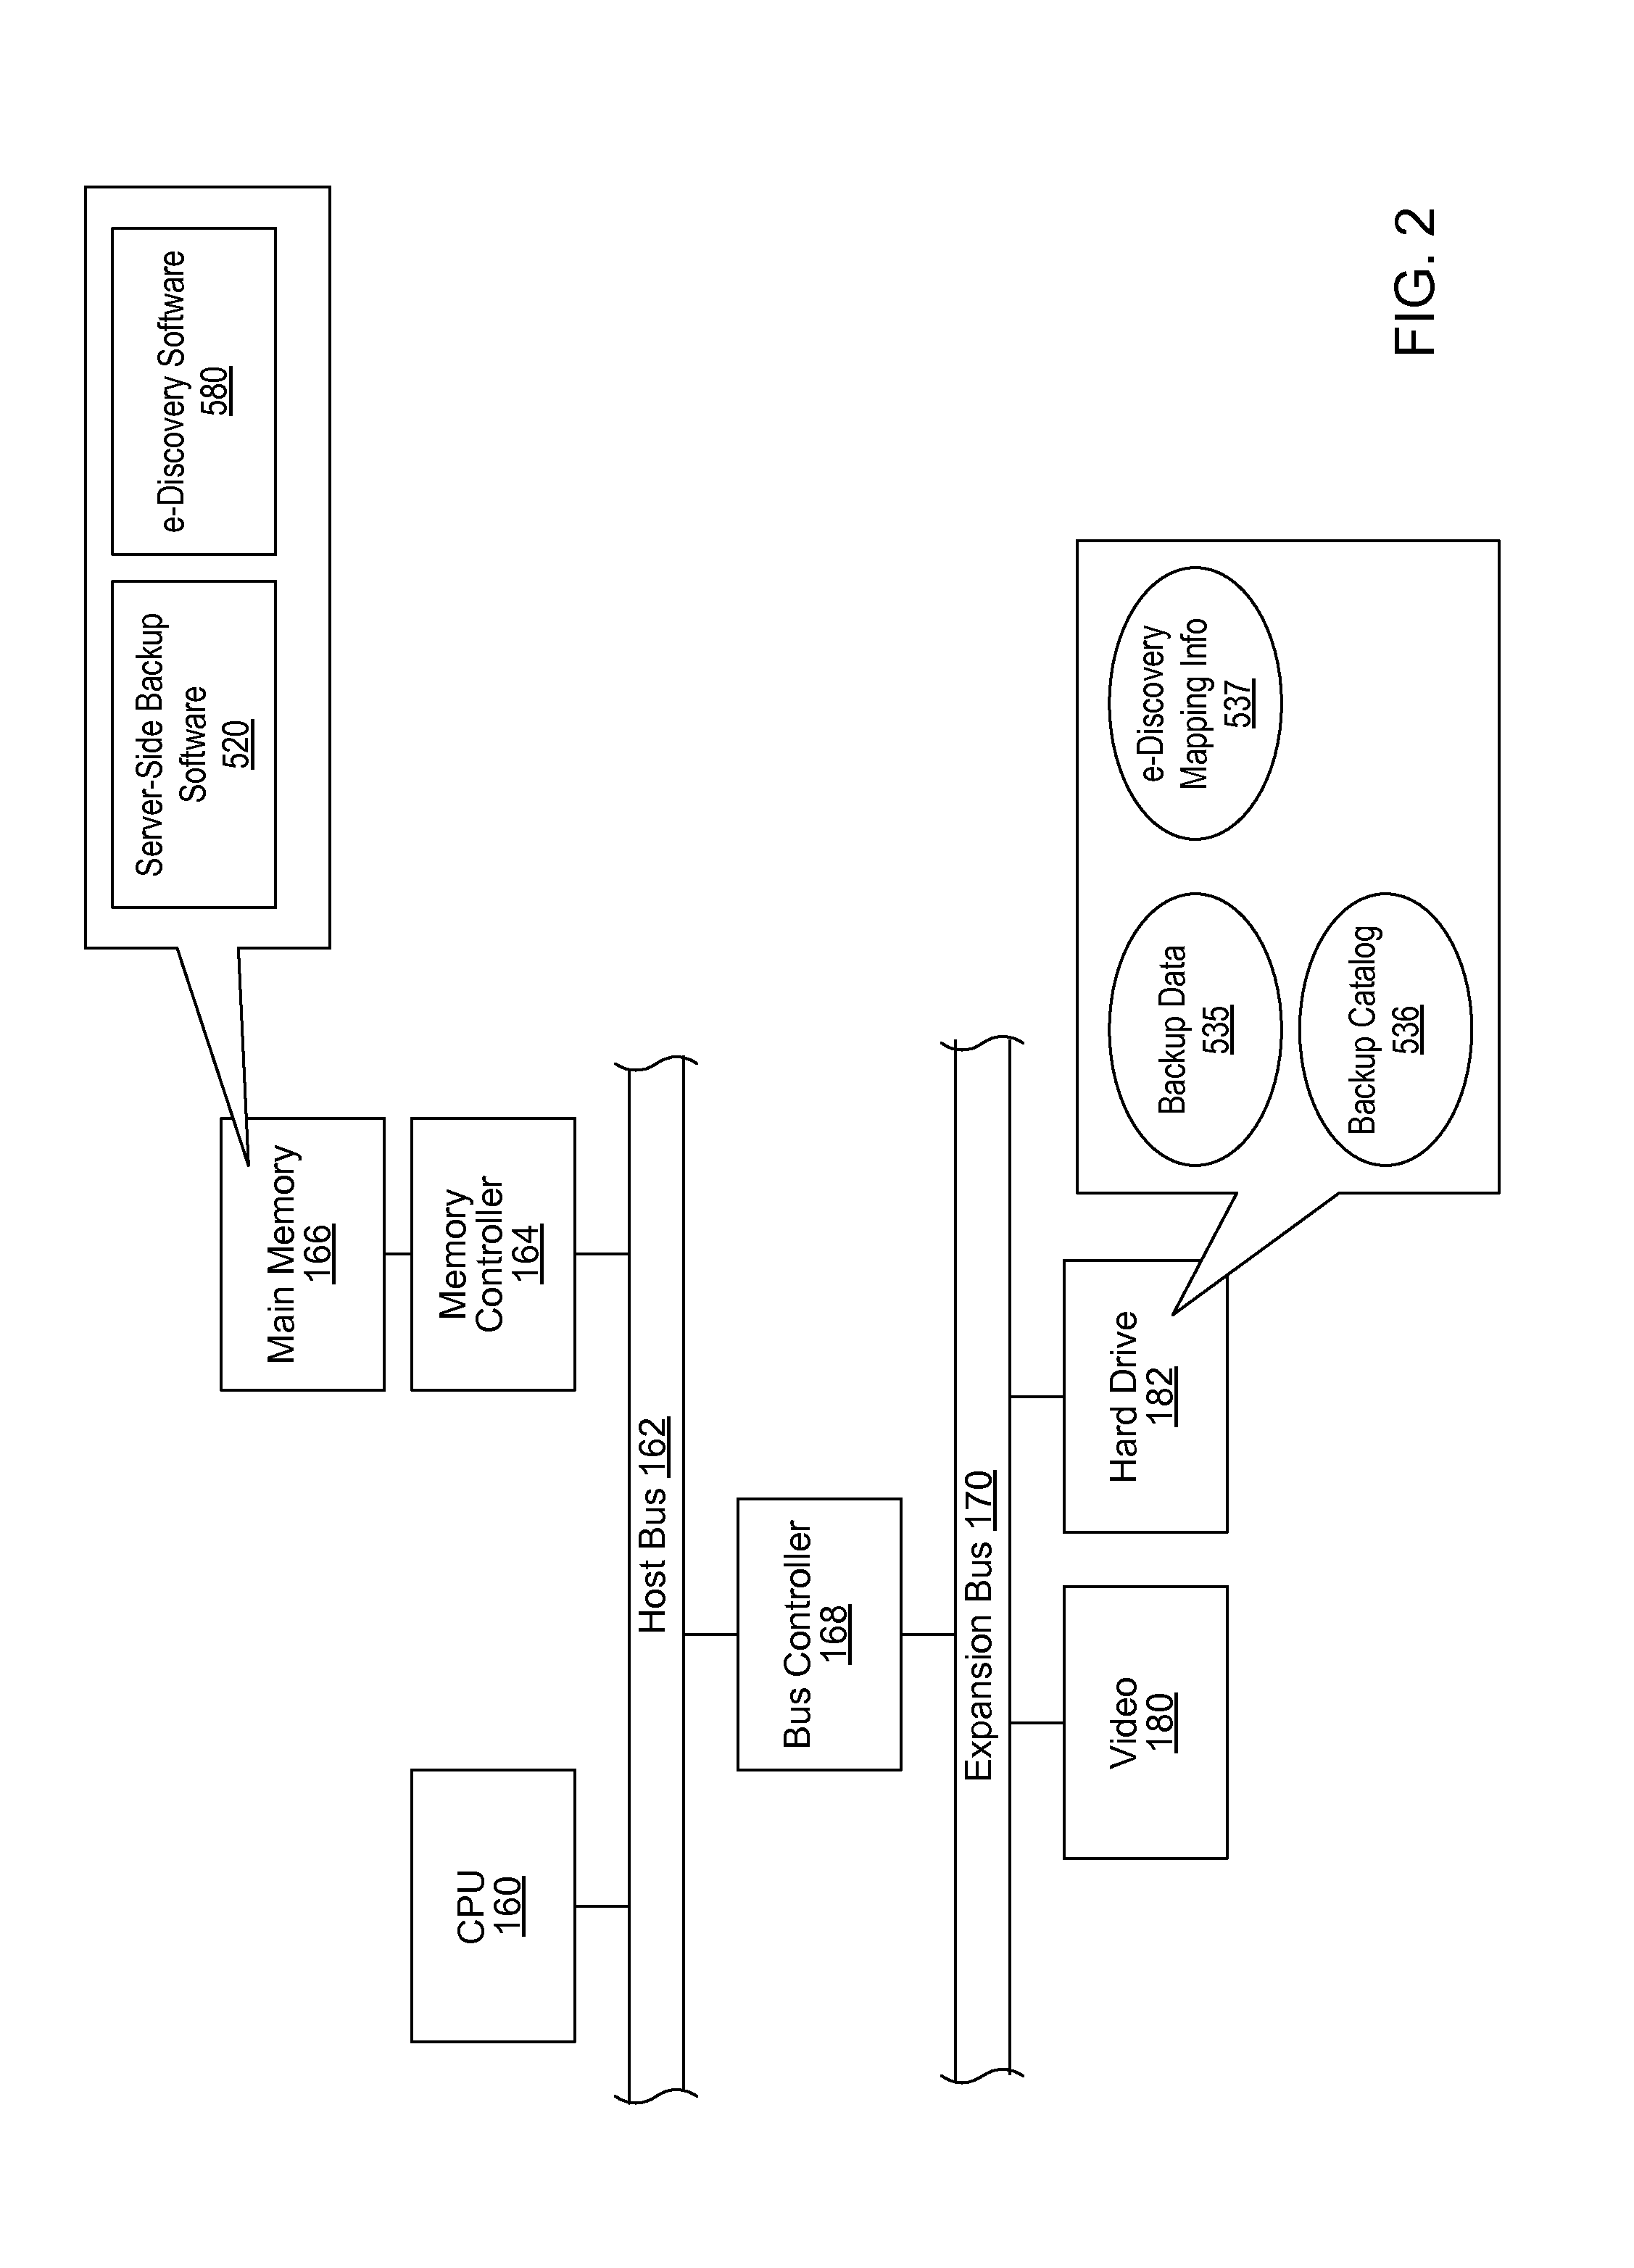 System and method for enabling electronic discovery searches on backup data in a computer system